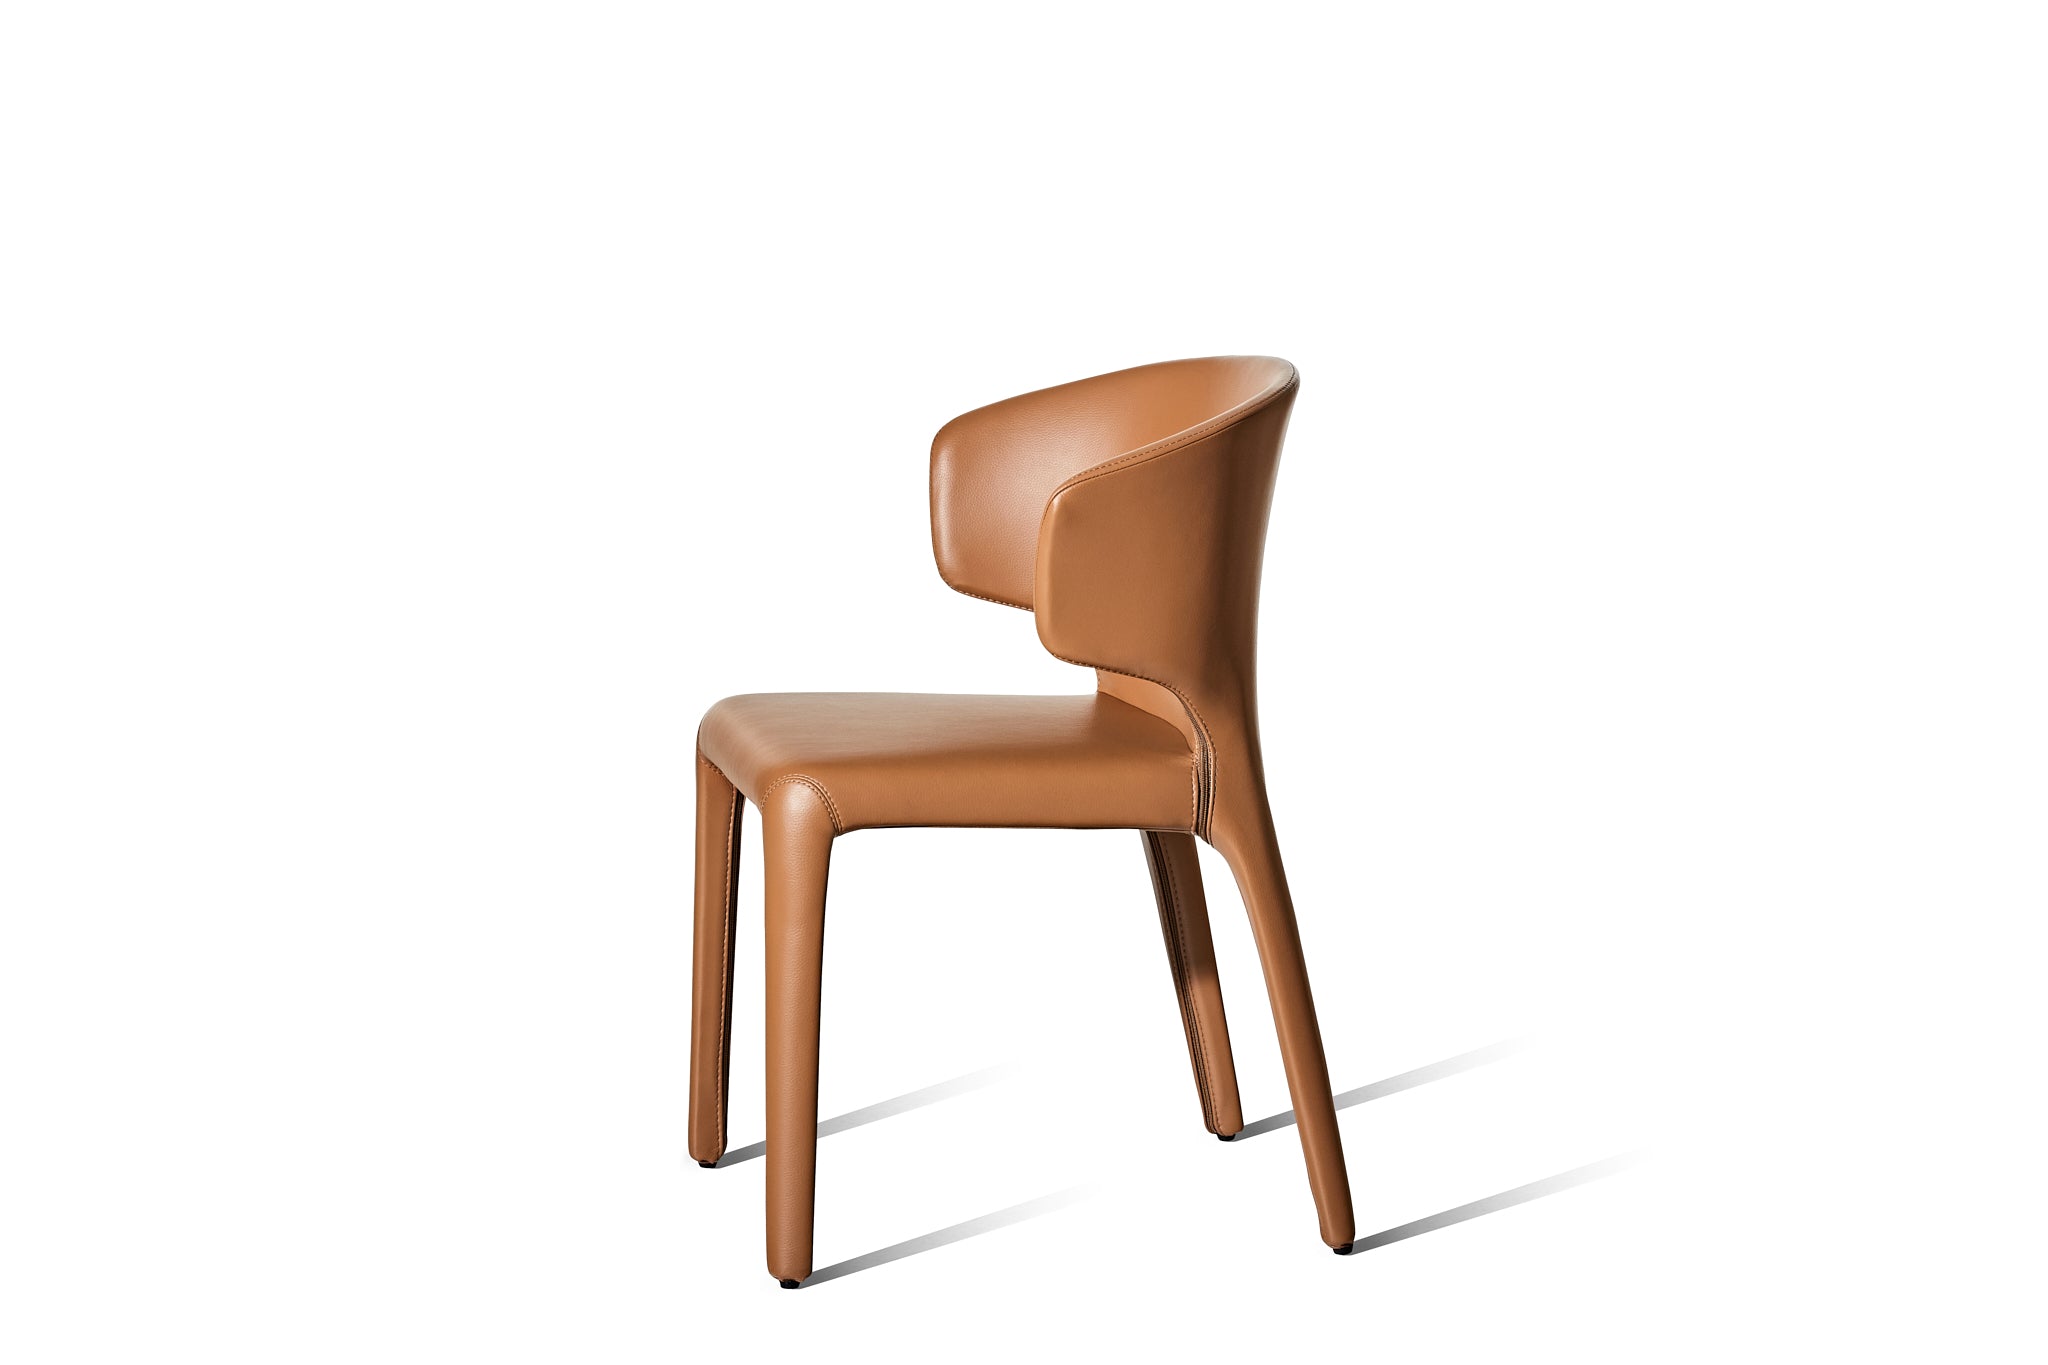 Husk Dining Chair, Chestnut Faux Leather - 60% OFF - Zuster Furniture